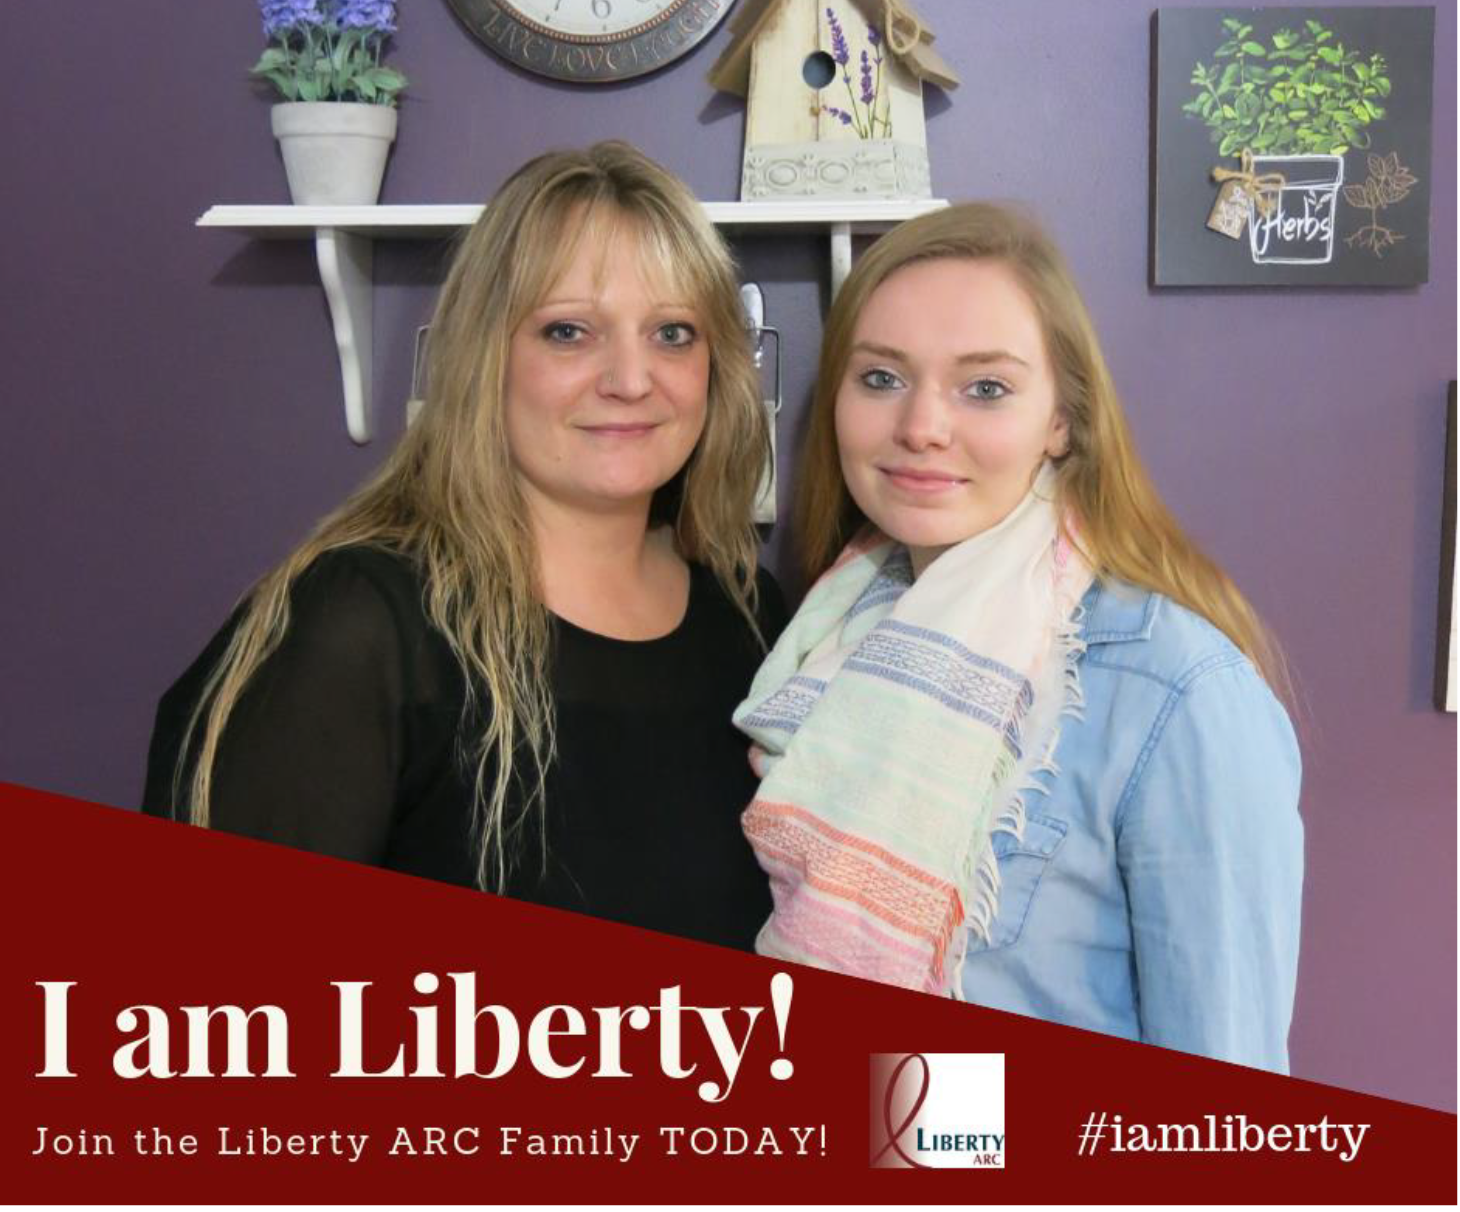 I am Liberty Story: Join the Liberty ARC Family Today. Headshot of Melissa Jonker and Meghan Cortright.